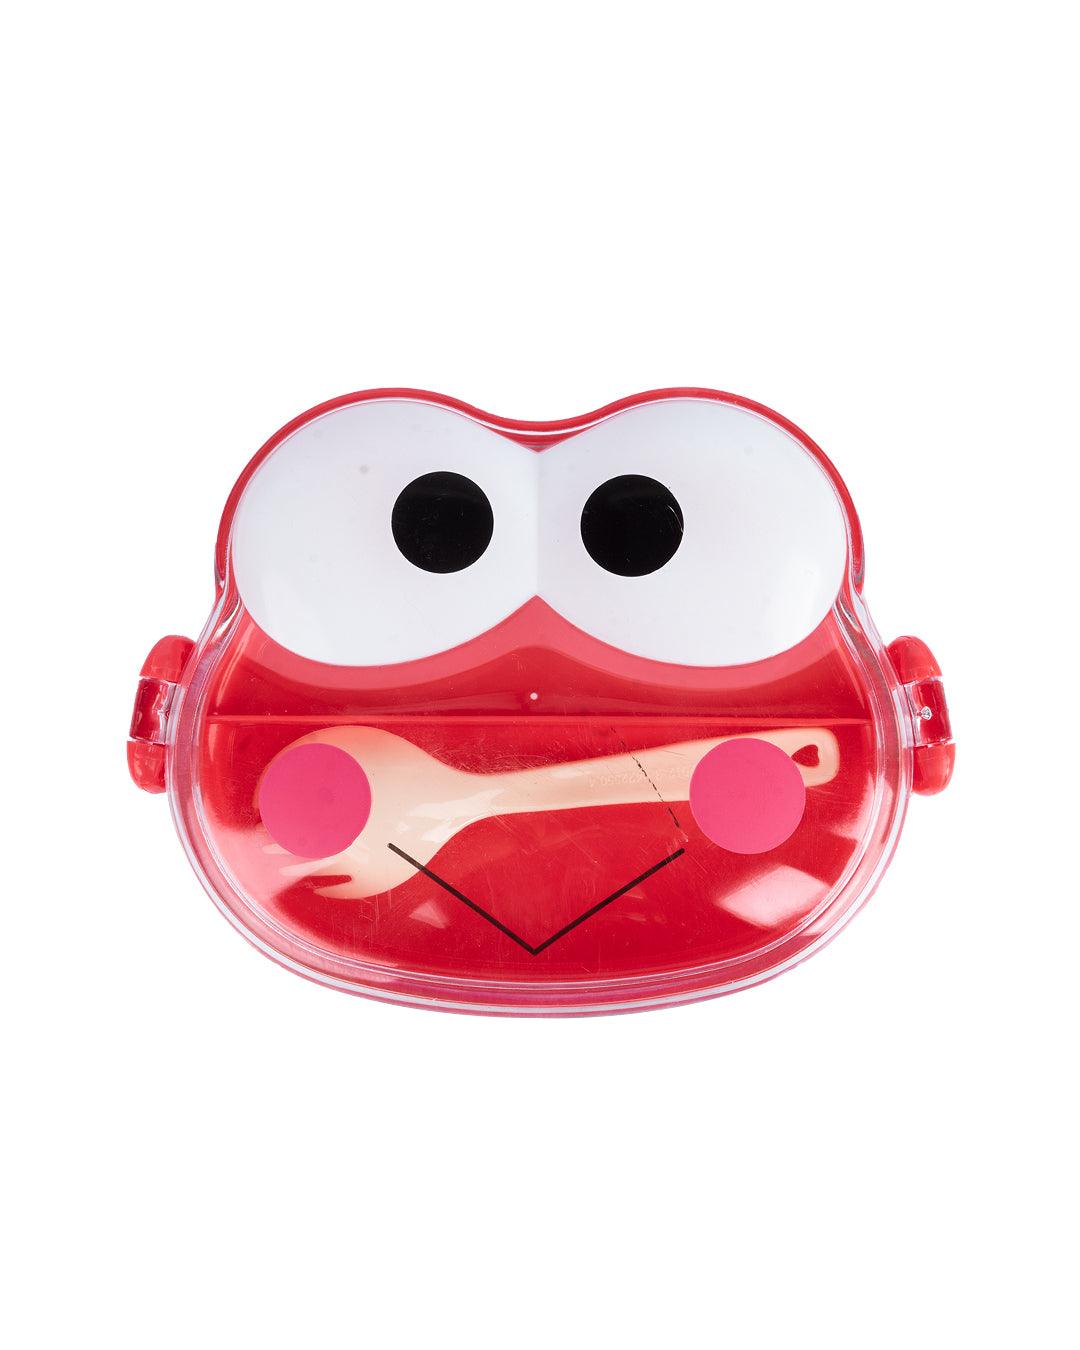 https://cdn.shopify.com/s/files/1/0267/1699/5754/files/double-layer-frog-shape-lunch-box-for-kids-with-spoon-red-plastic-kid-lunch-box-2-29021530751146.jpg?v=1697008720&width=1080